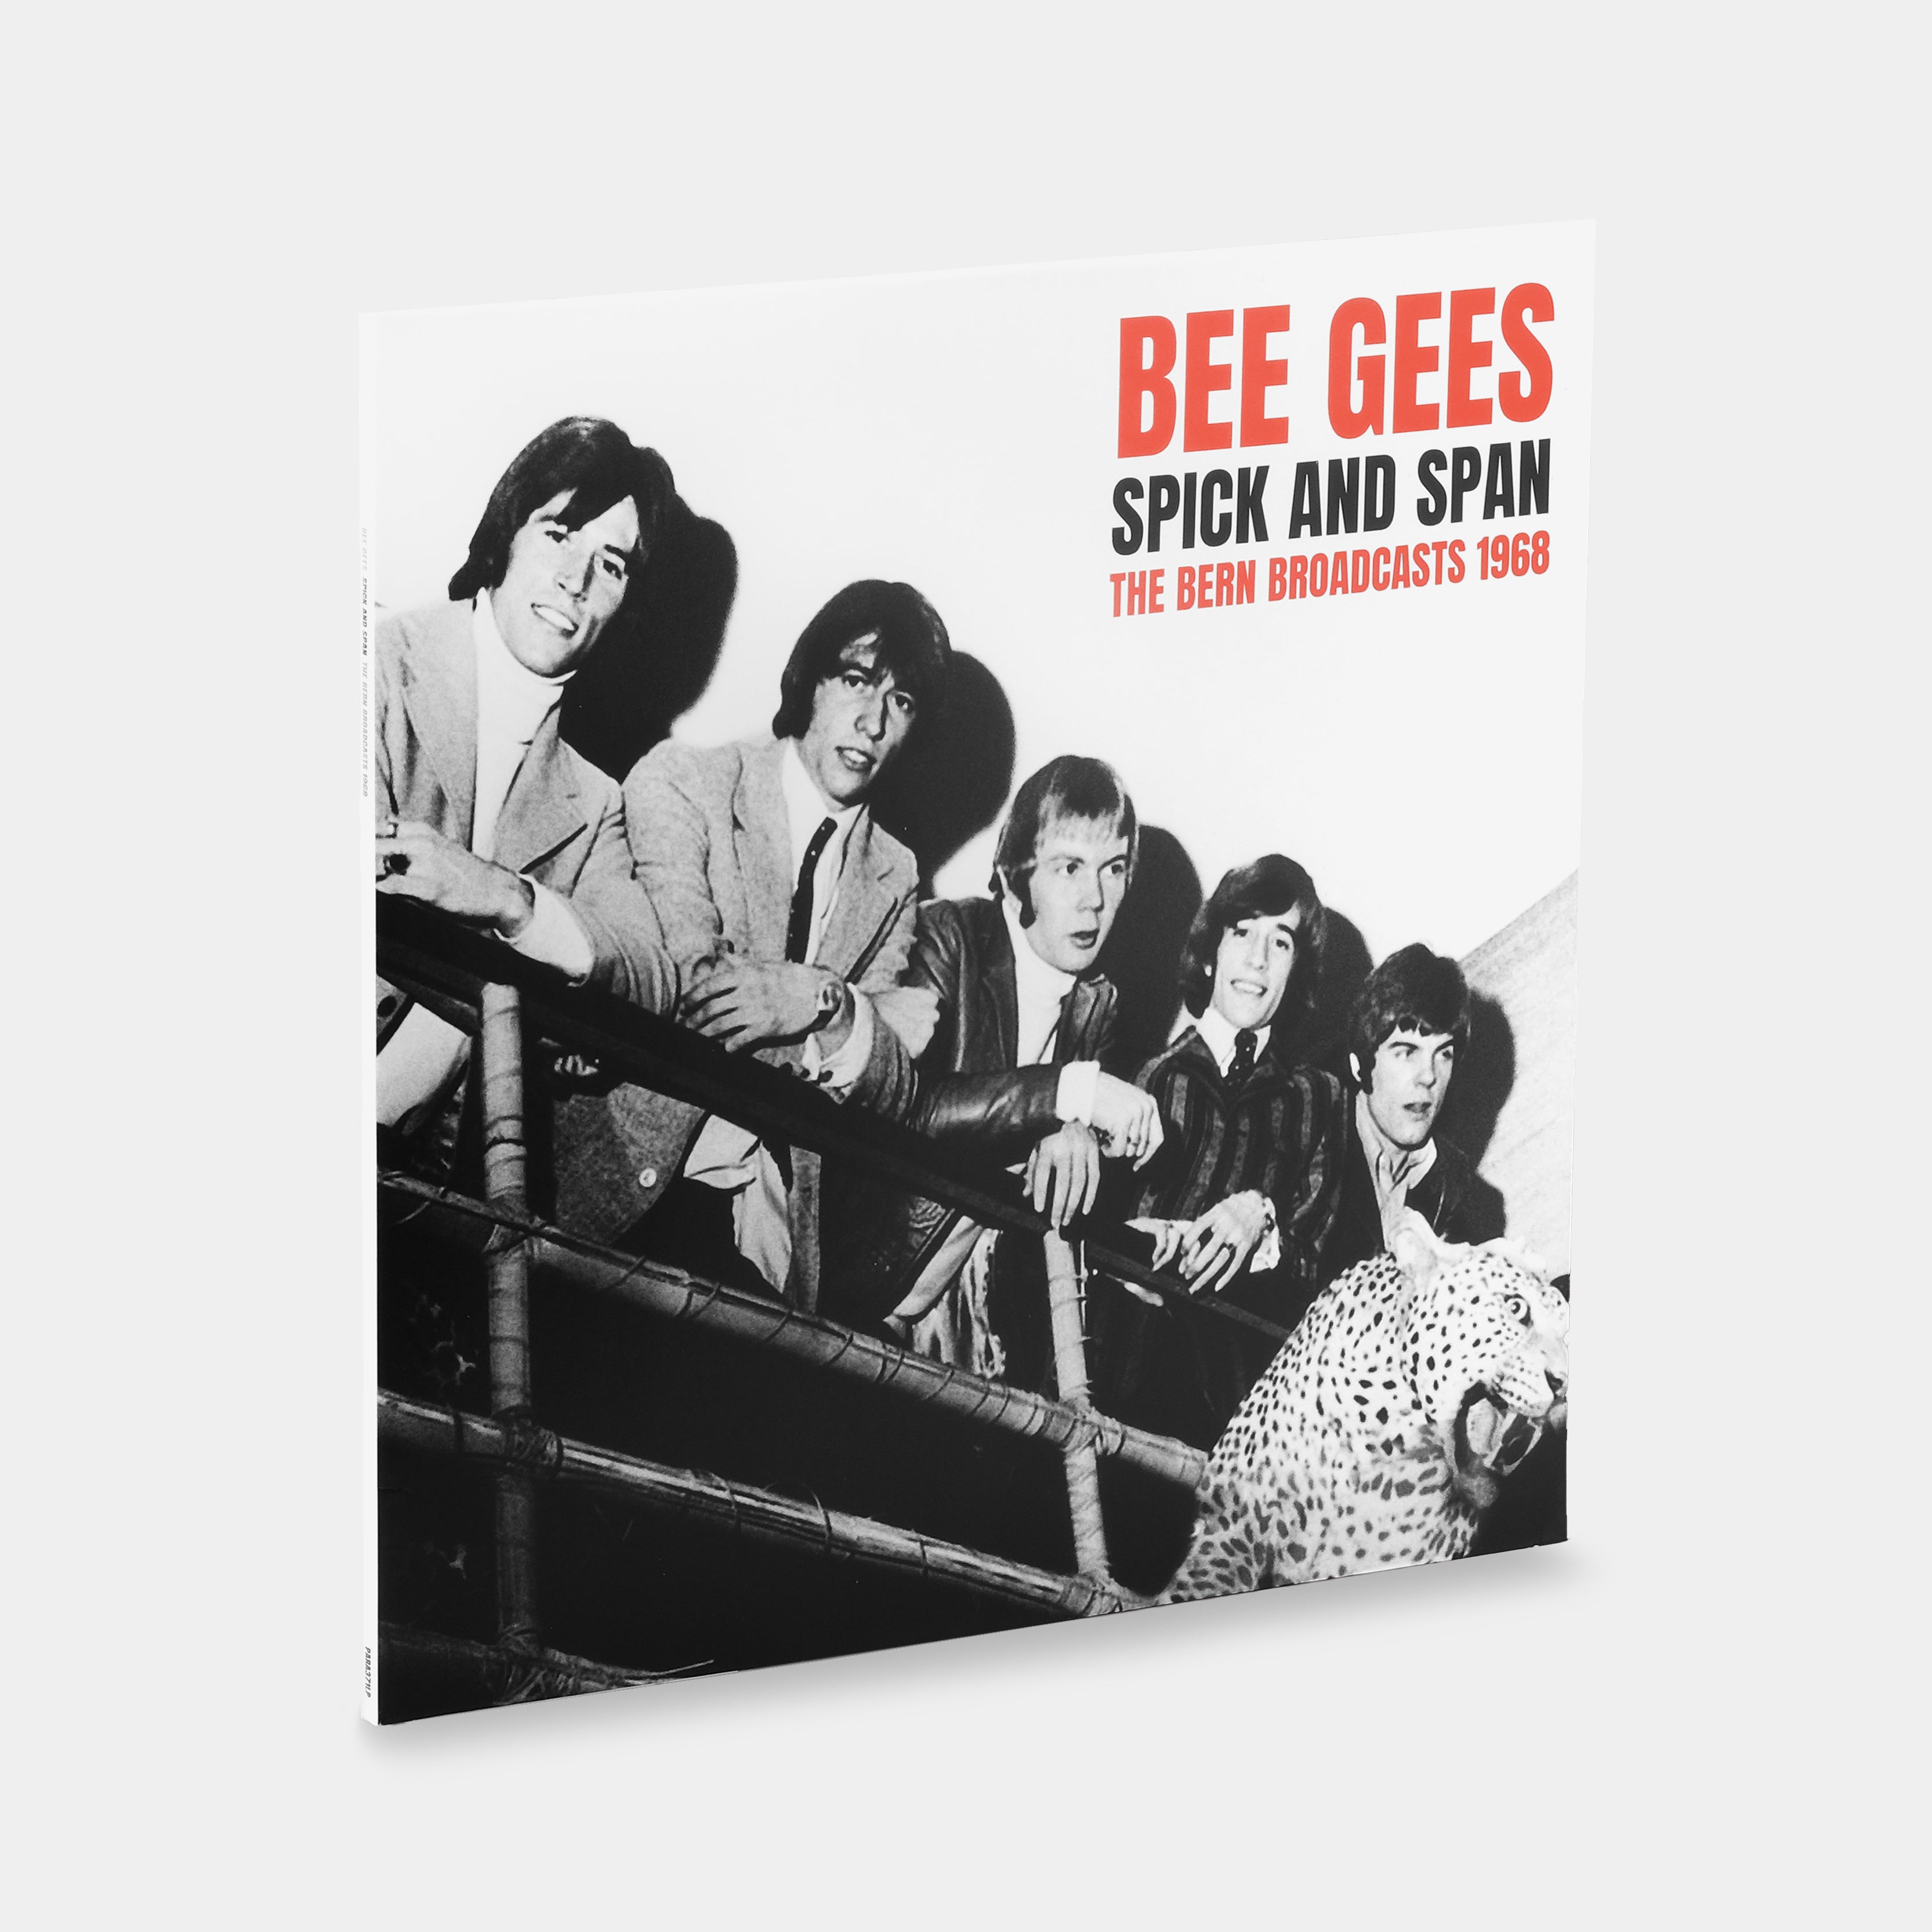 Bee Gees - Spick And Span LP Vinyl Record